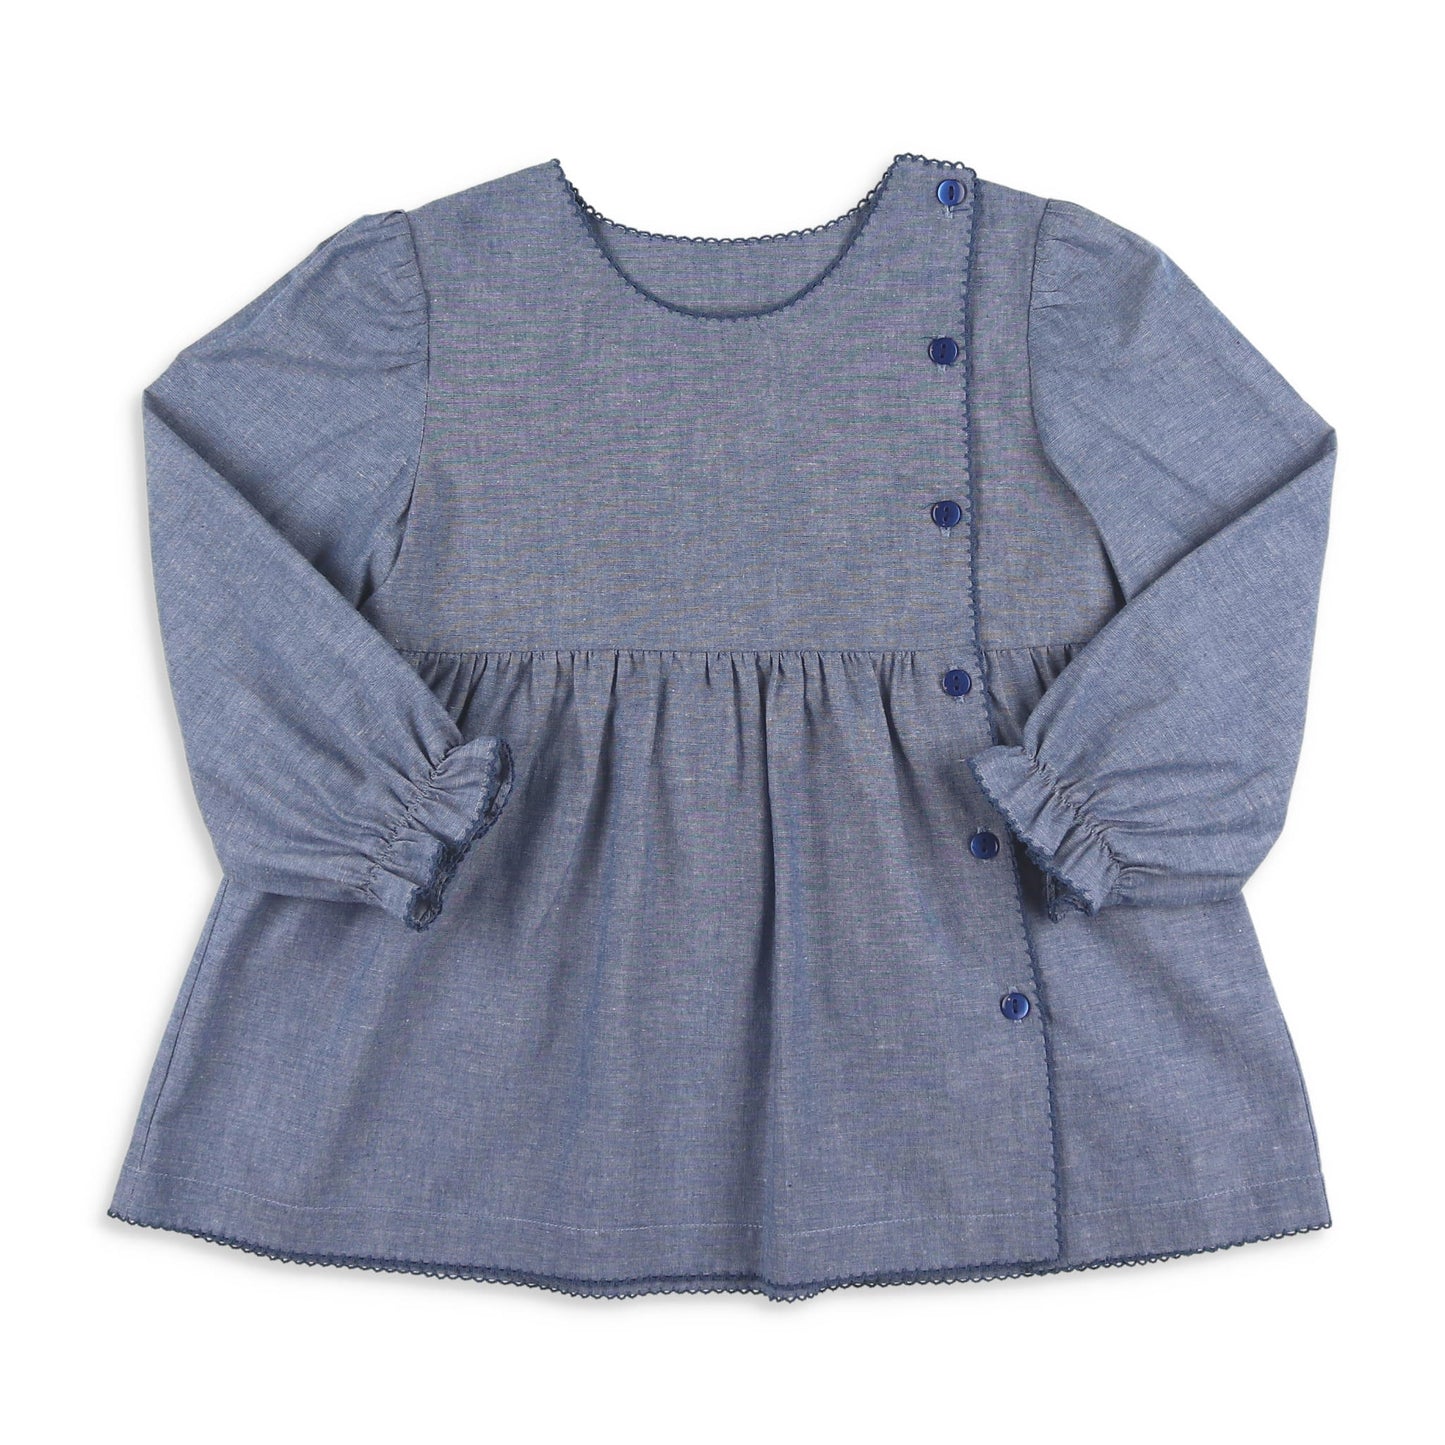 Chambray Sallie Top